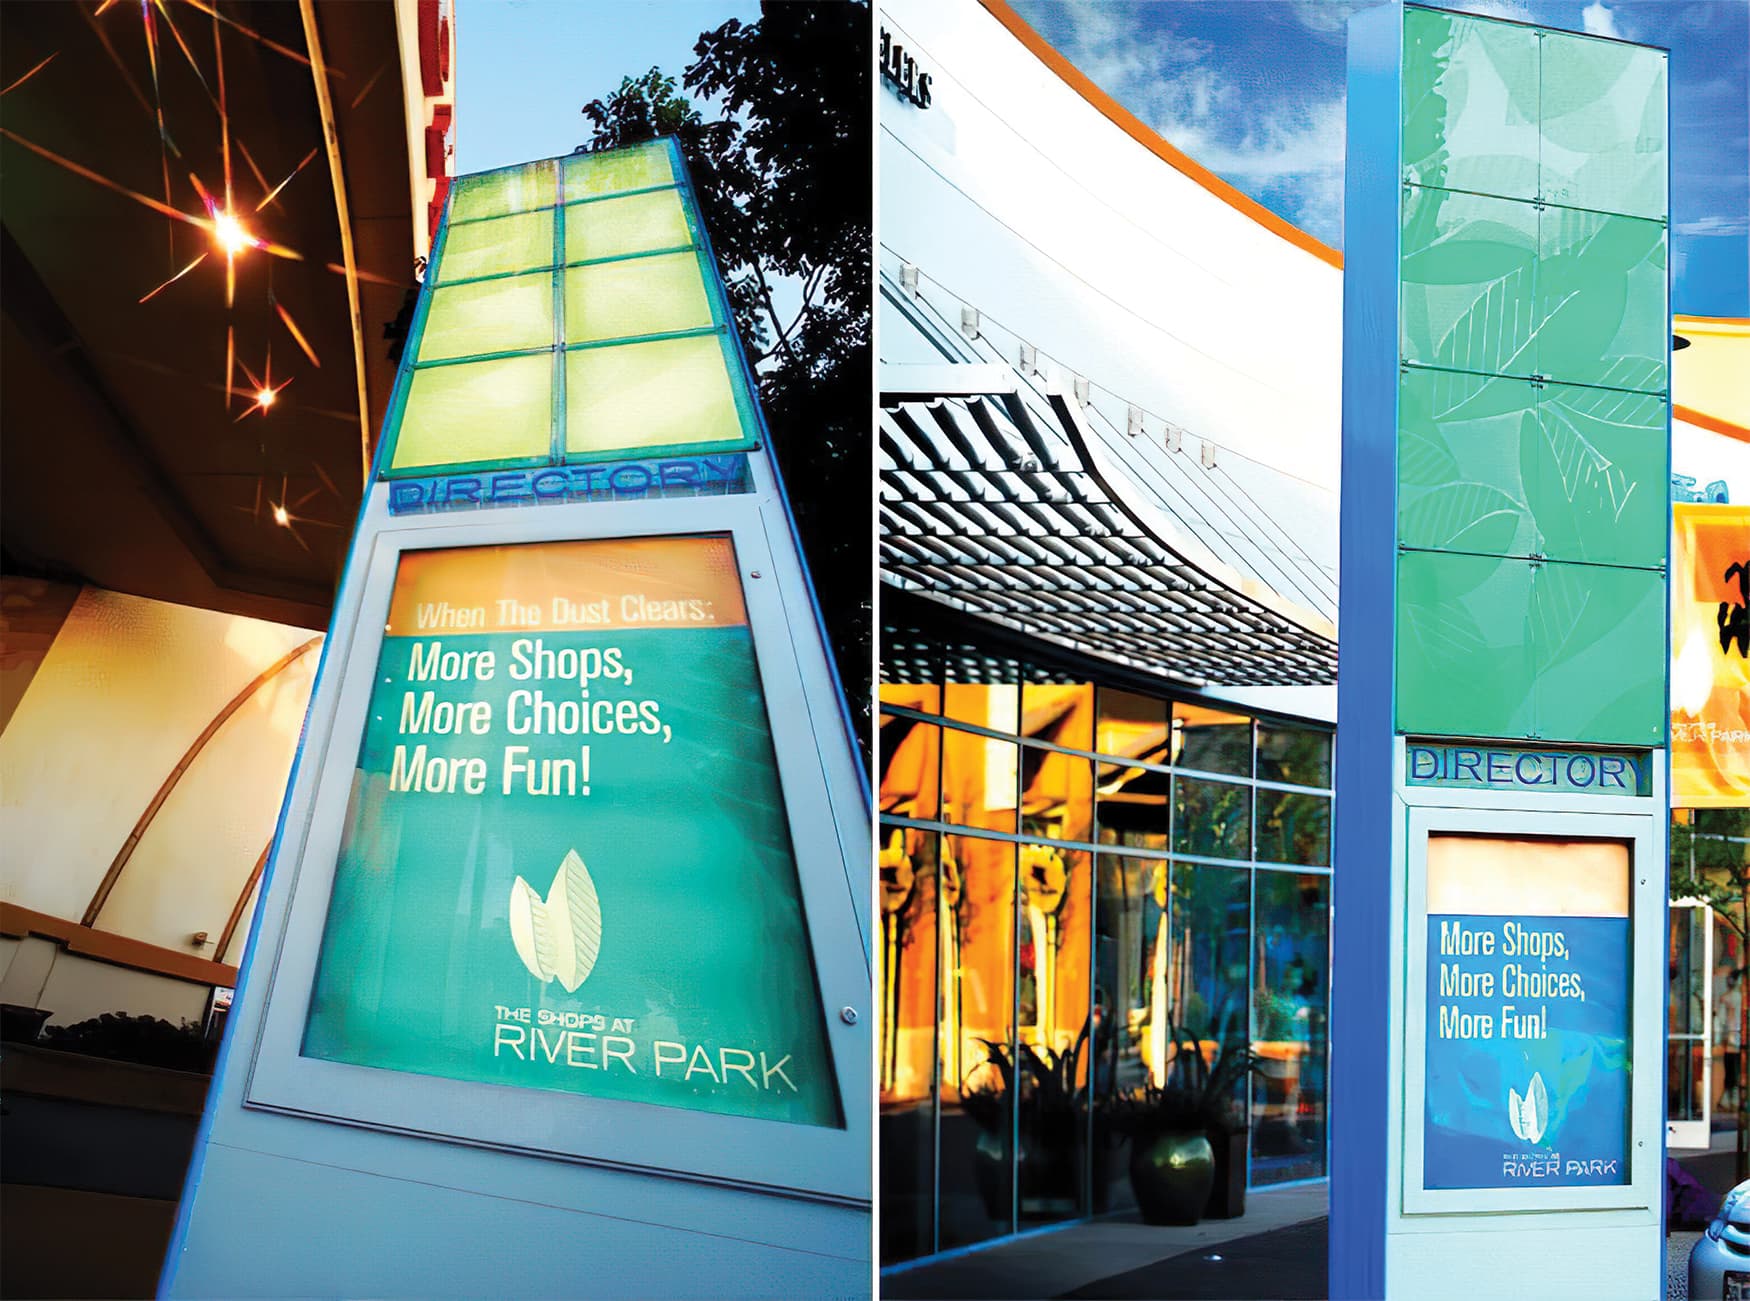 The Shops at River Park, a retail shopping center in Fresno, California. RSM Design prepared environmental graphic design services as well as wayfinding and placemaking elements. Project Pedestrian Directory Map.